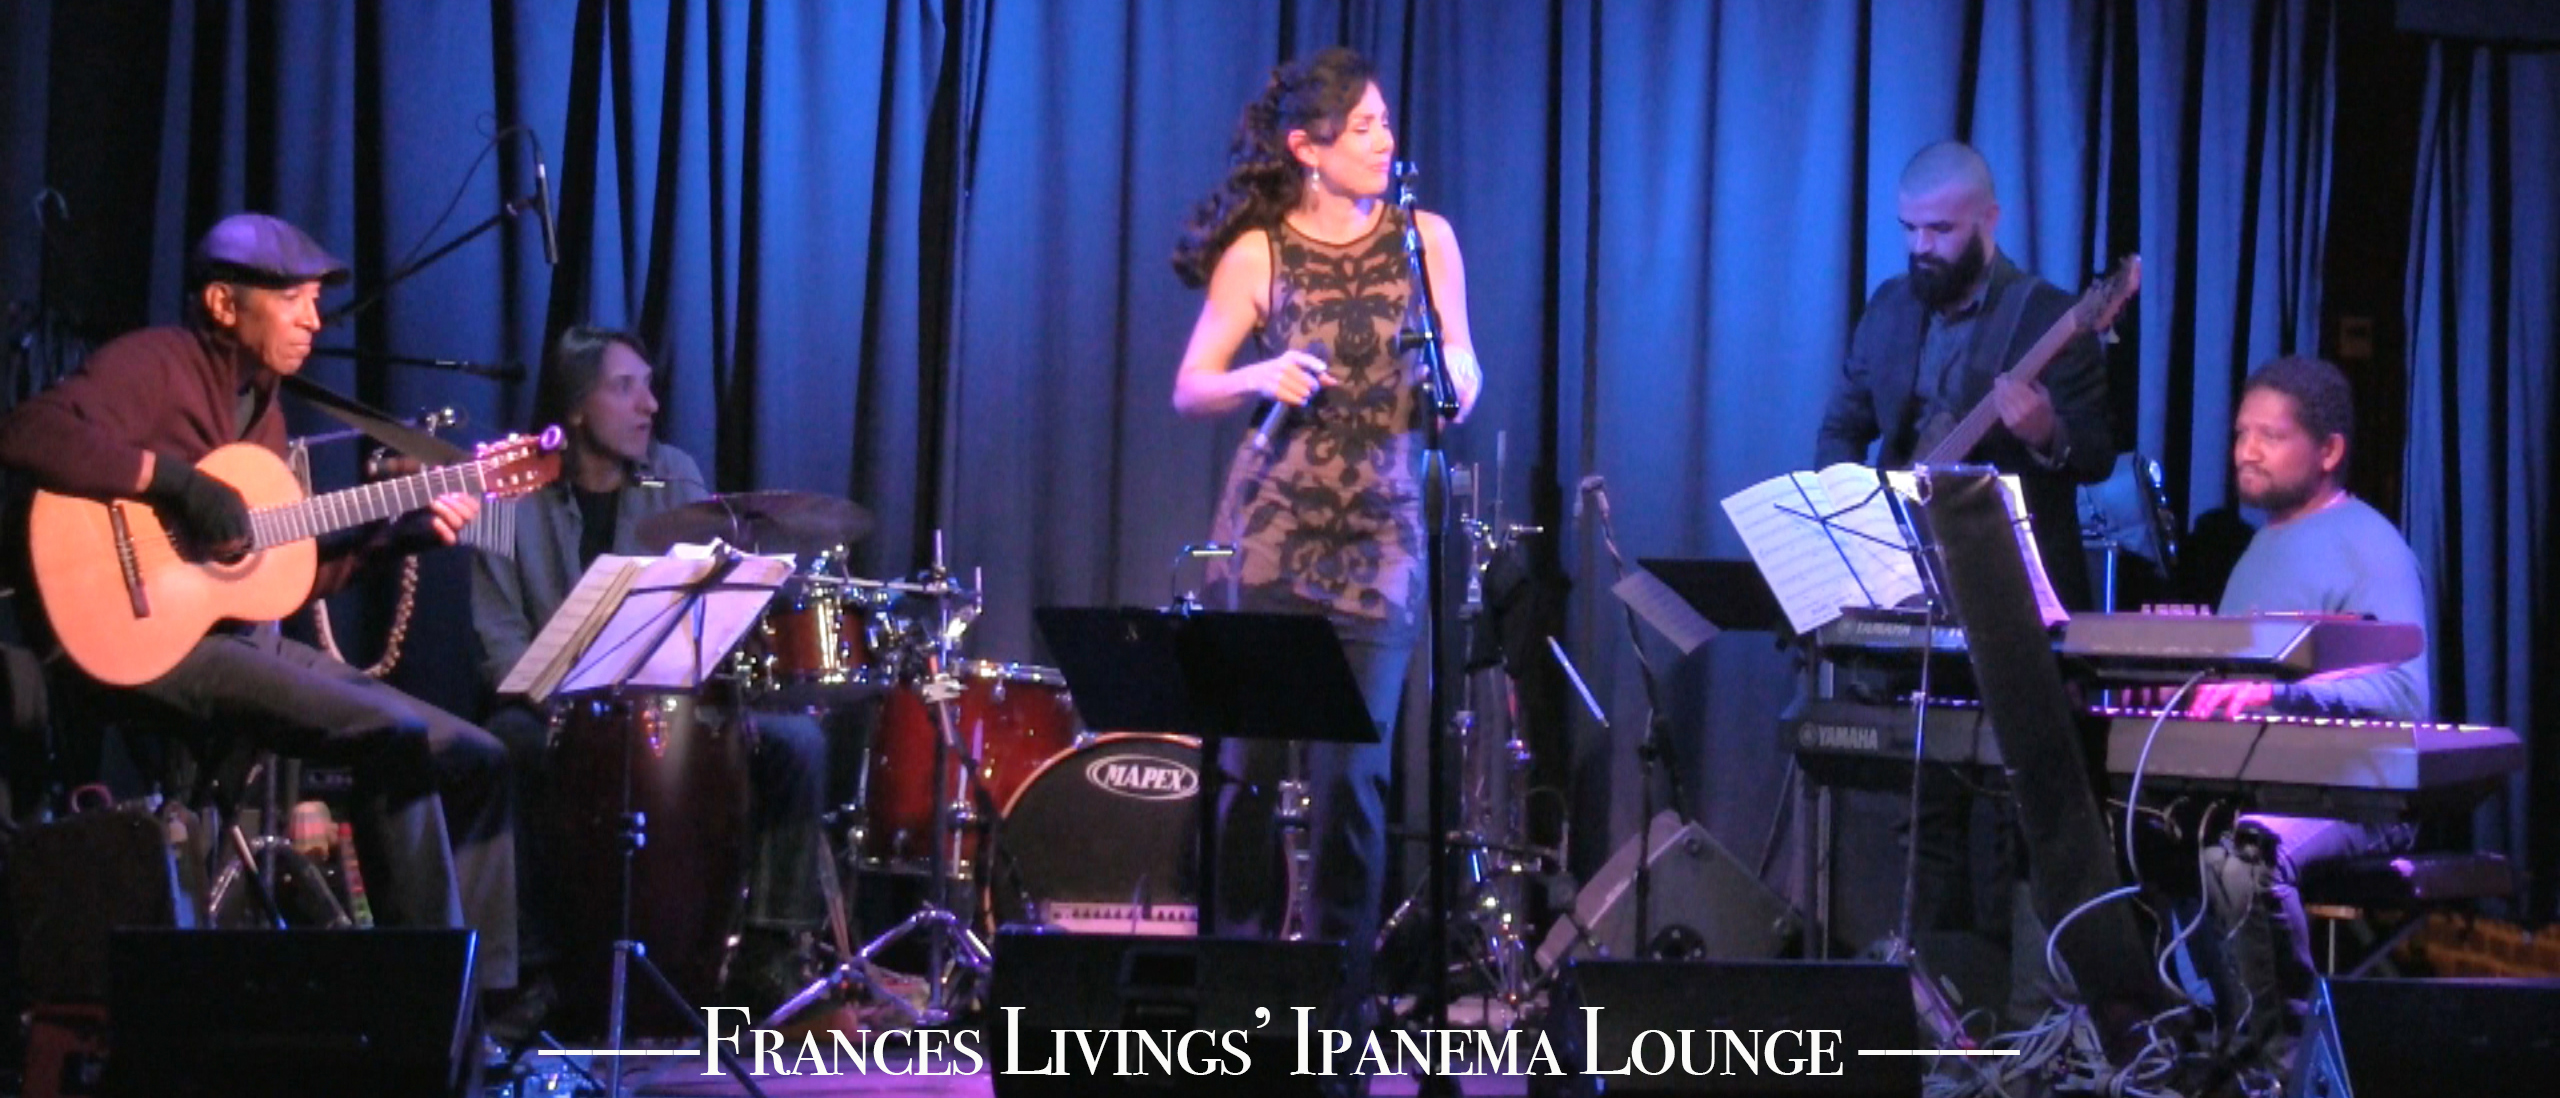 BANNER_27_Band_Frances-Livings_Ipanema-Lounge_Molly-Malones_2016-02-22-cropped